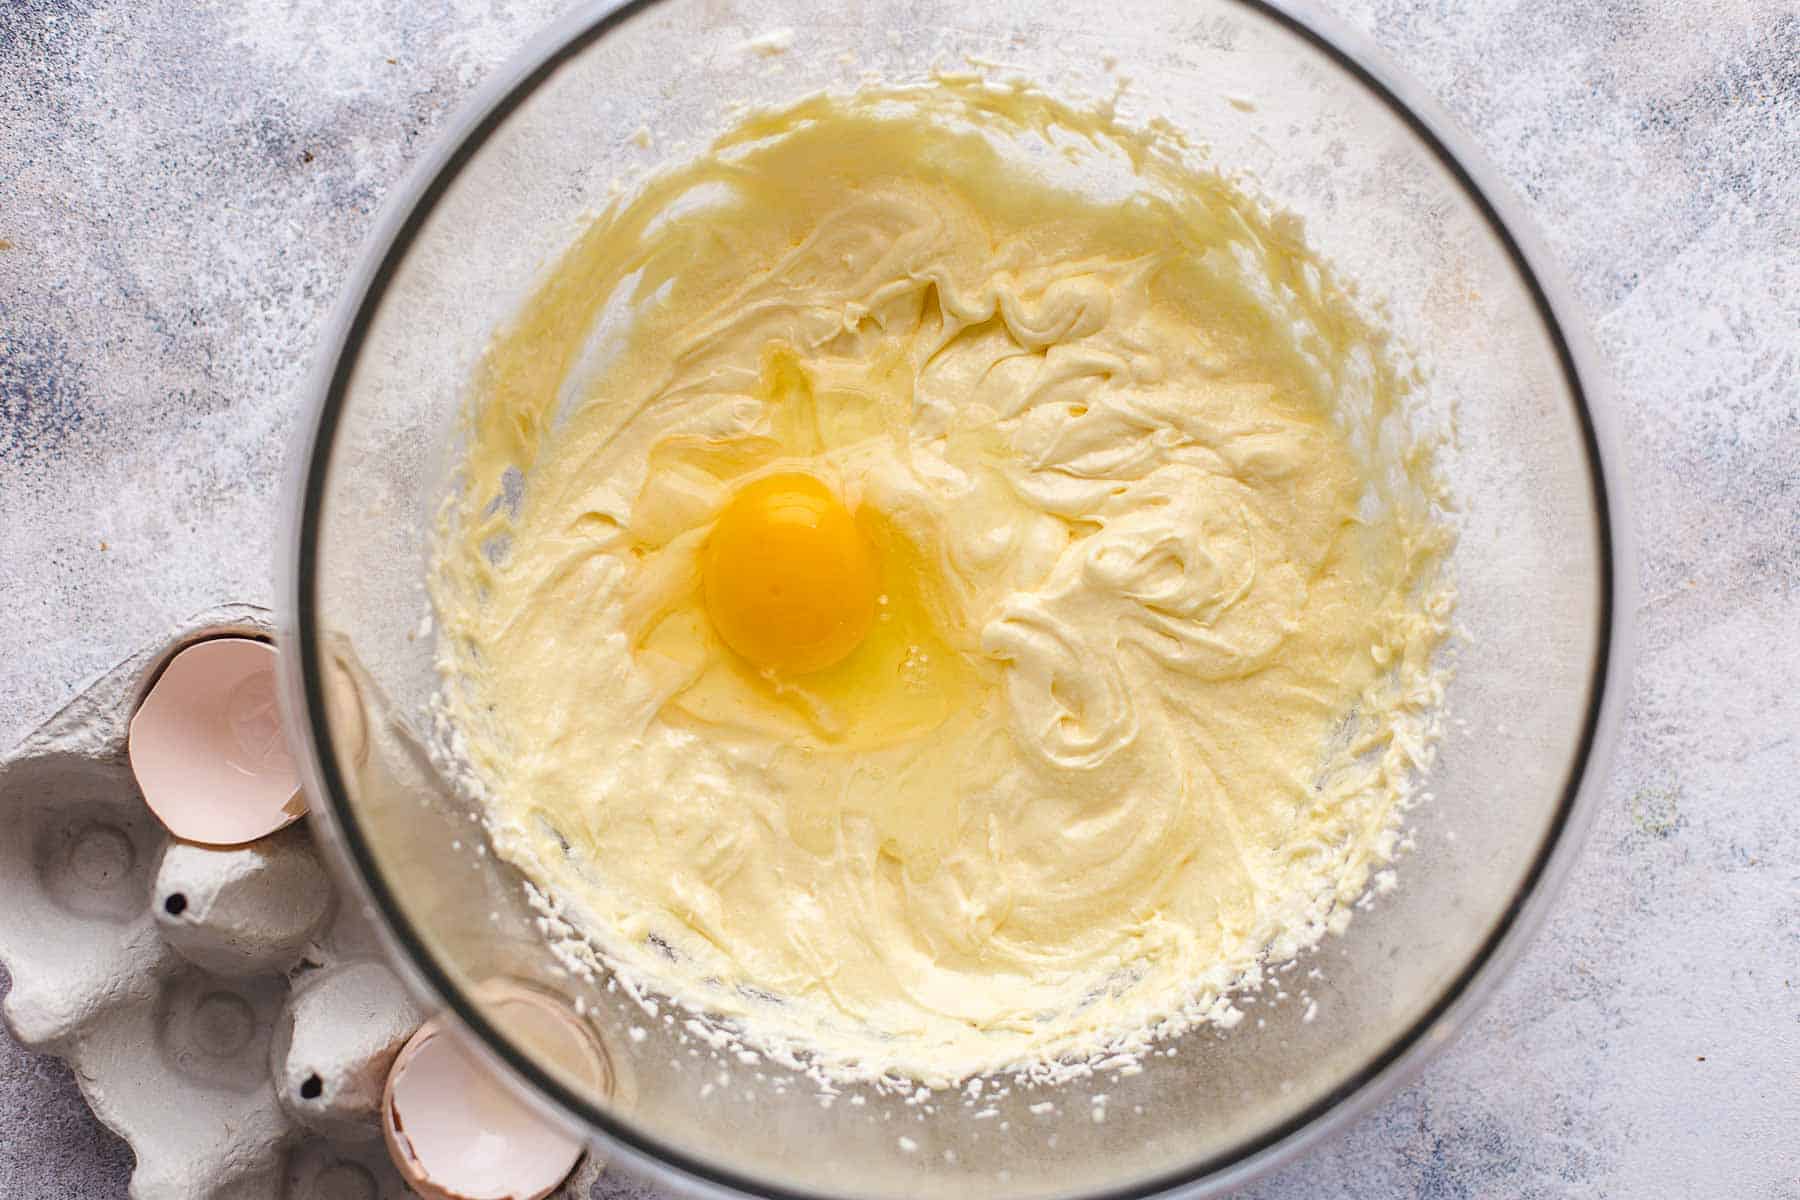 mixed batter with egg on top in a bowl